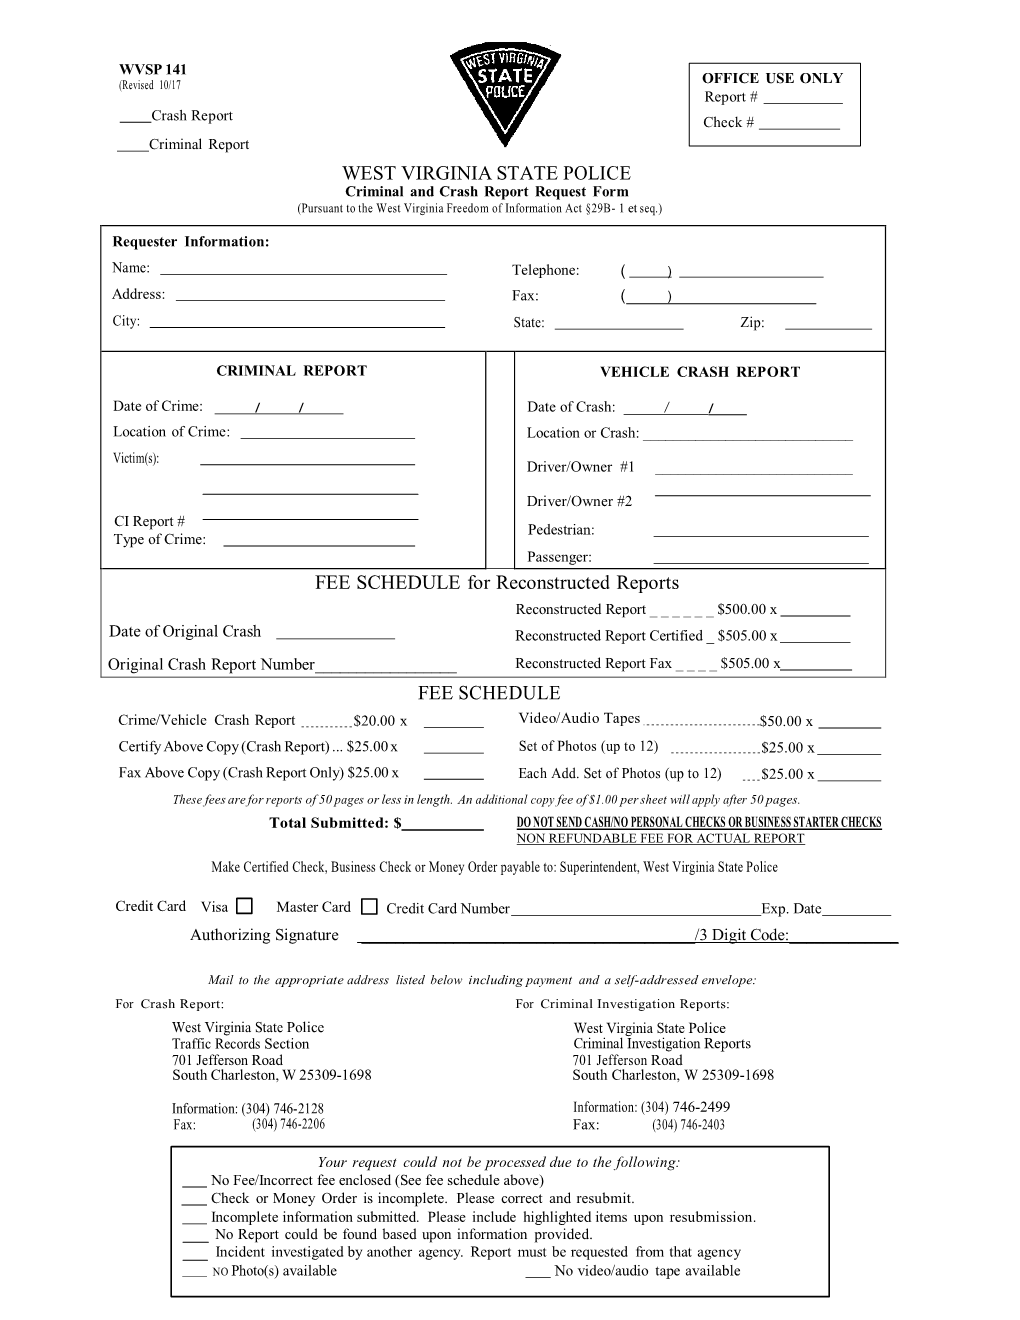 Criminal and Crash Report Request Form (Pursuant to the West Virginia Freedom of Information Act §29B- 1 Et Seq.)